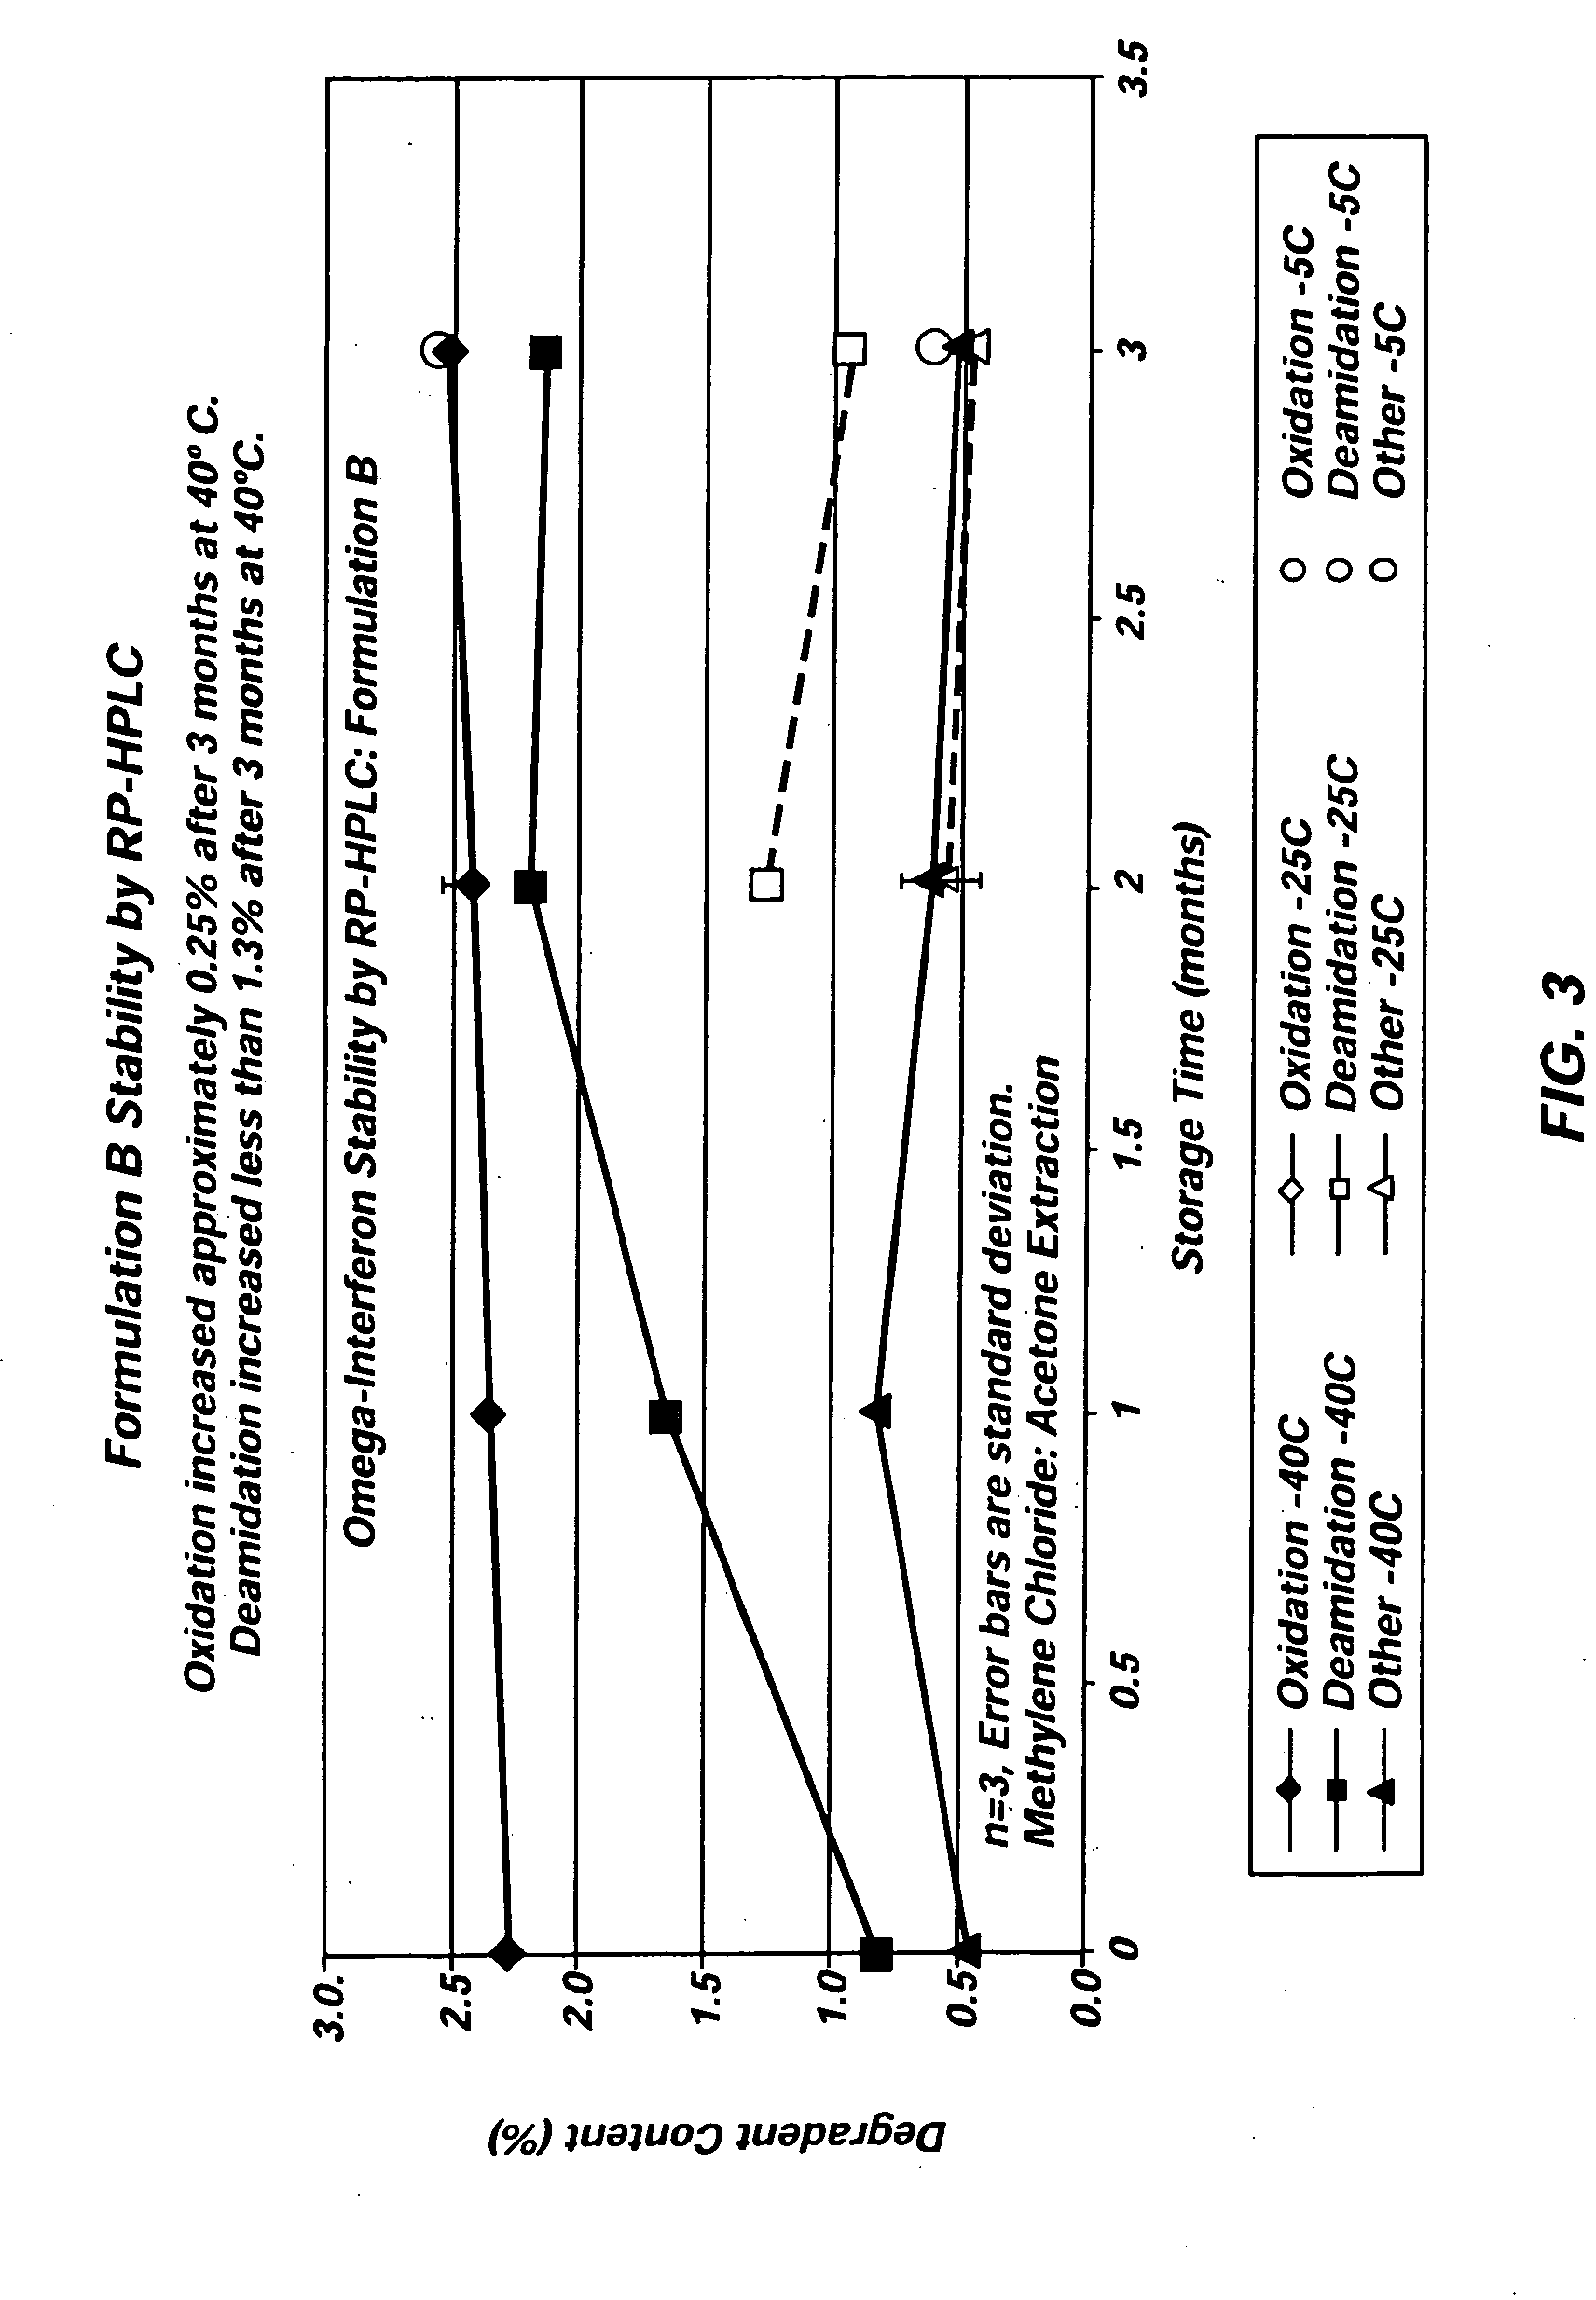 Non-aqueous single phase vehicles and formulations utilizing such vehicles